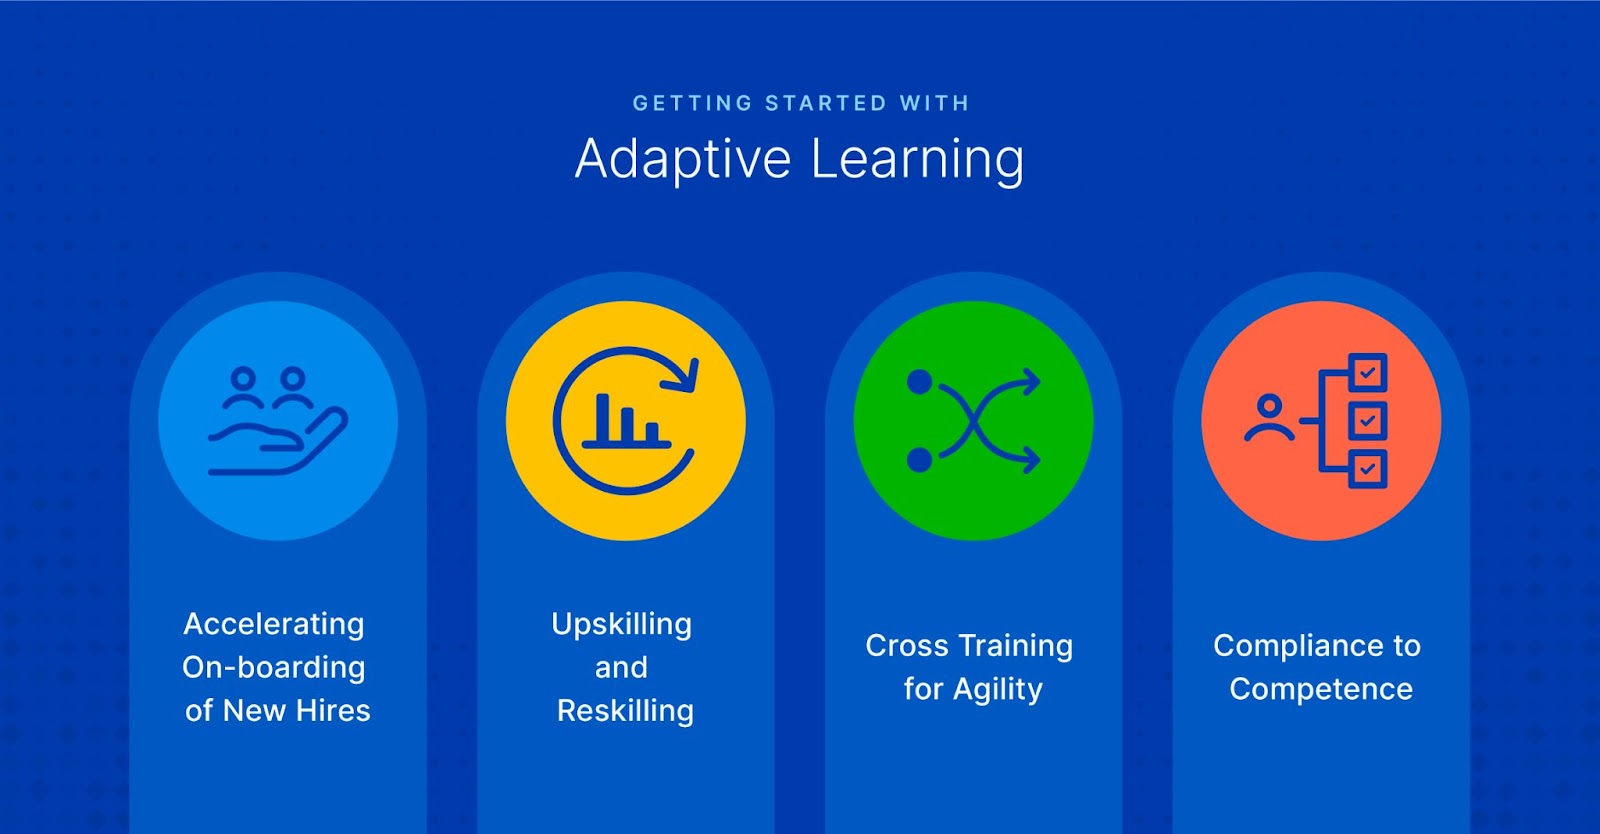 4 categories of adaptive learning with icons